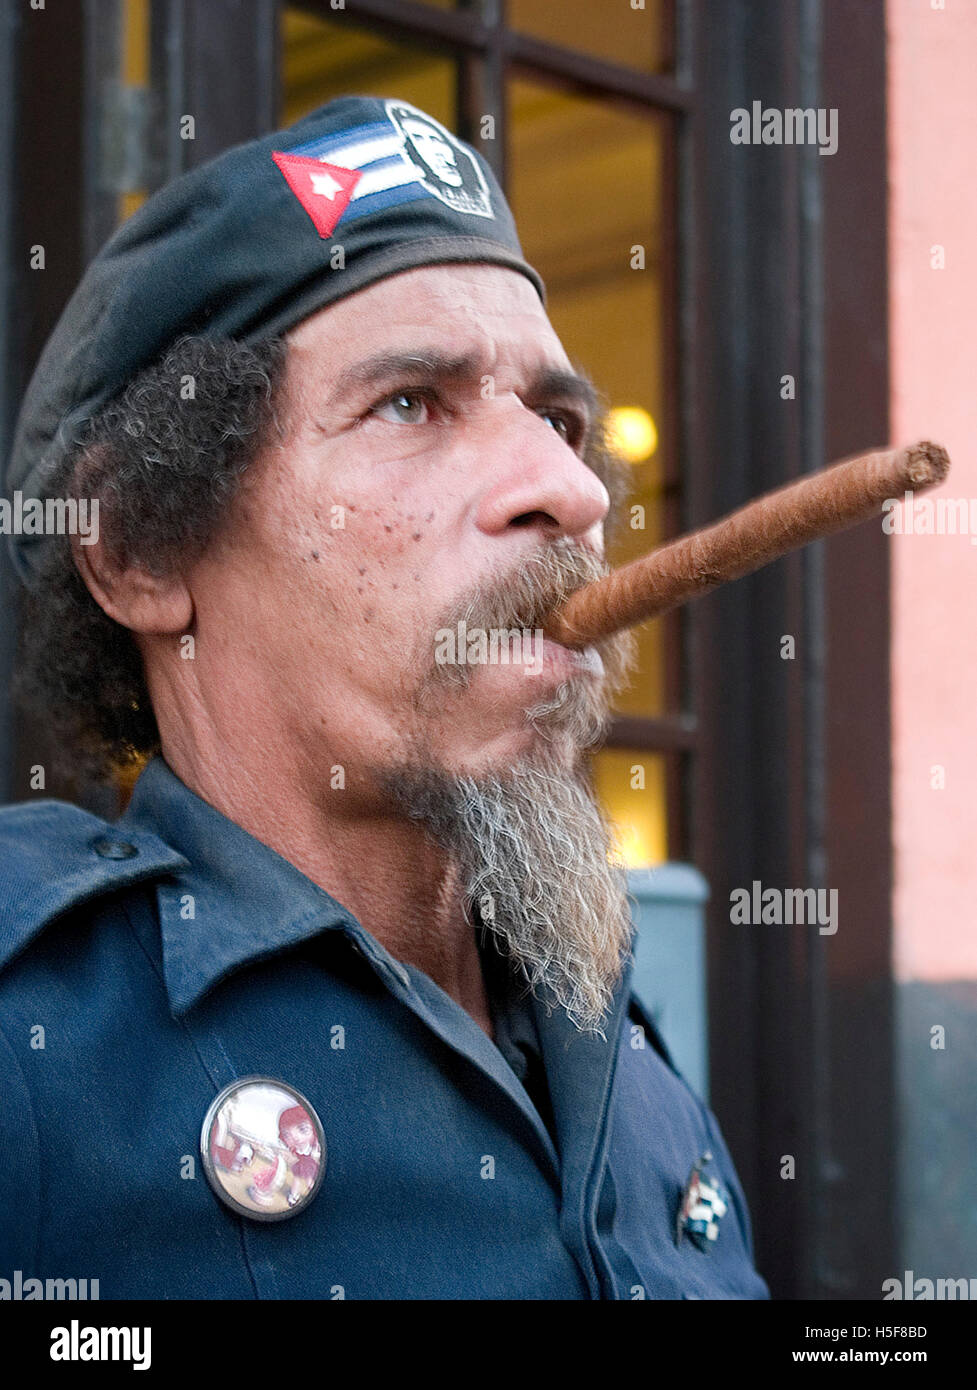 Mar 28, 2006 - Havana, CUBA - Che Guevara impersonator with cuban cigar. The Republic of Cuba is located in the northern Caribbean and south of the United States. The first European to visit Cuba was explorer Christopher Columbus in 1492. Centuries of colonial rule and revolutions followed. Batista was deposed by Fidel Castro and Che guevara in 1953. After the revolution trade with comminist Russia grew. The economy was hit hard in the 1990s following the collapse of the Soviet Union. Cuba currently trades with almost every nation in the world, albeit with restrictions from the U.S. embargo. T Stock Photo